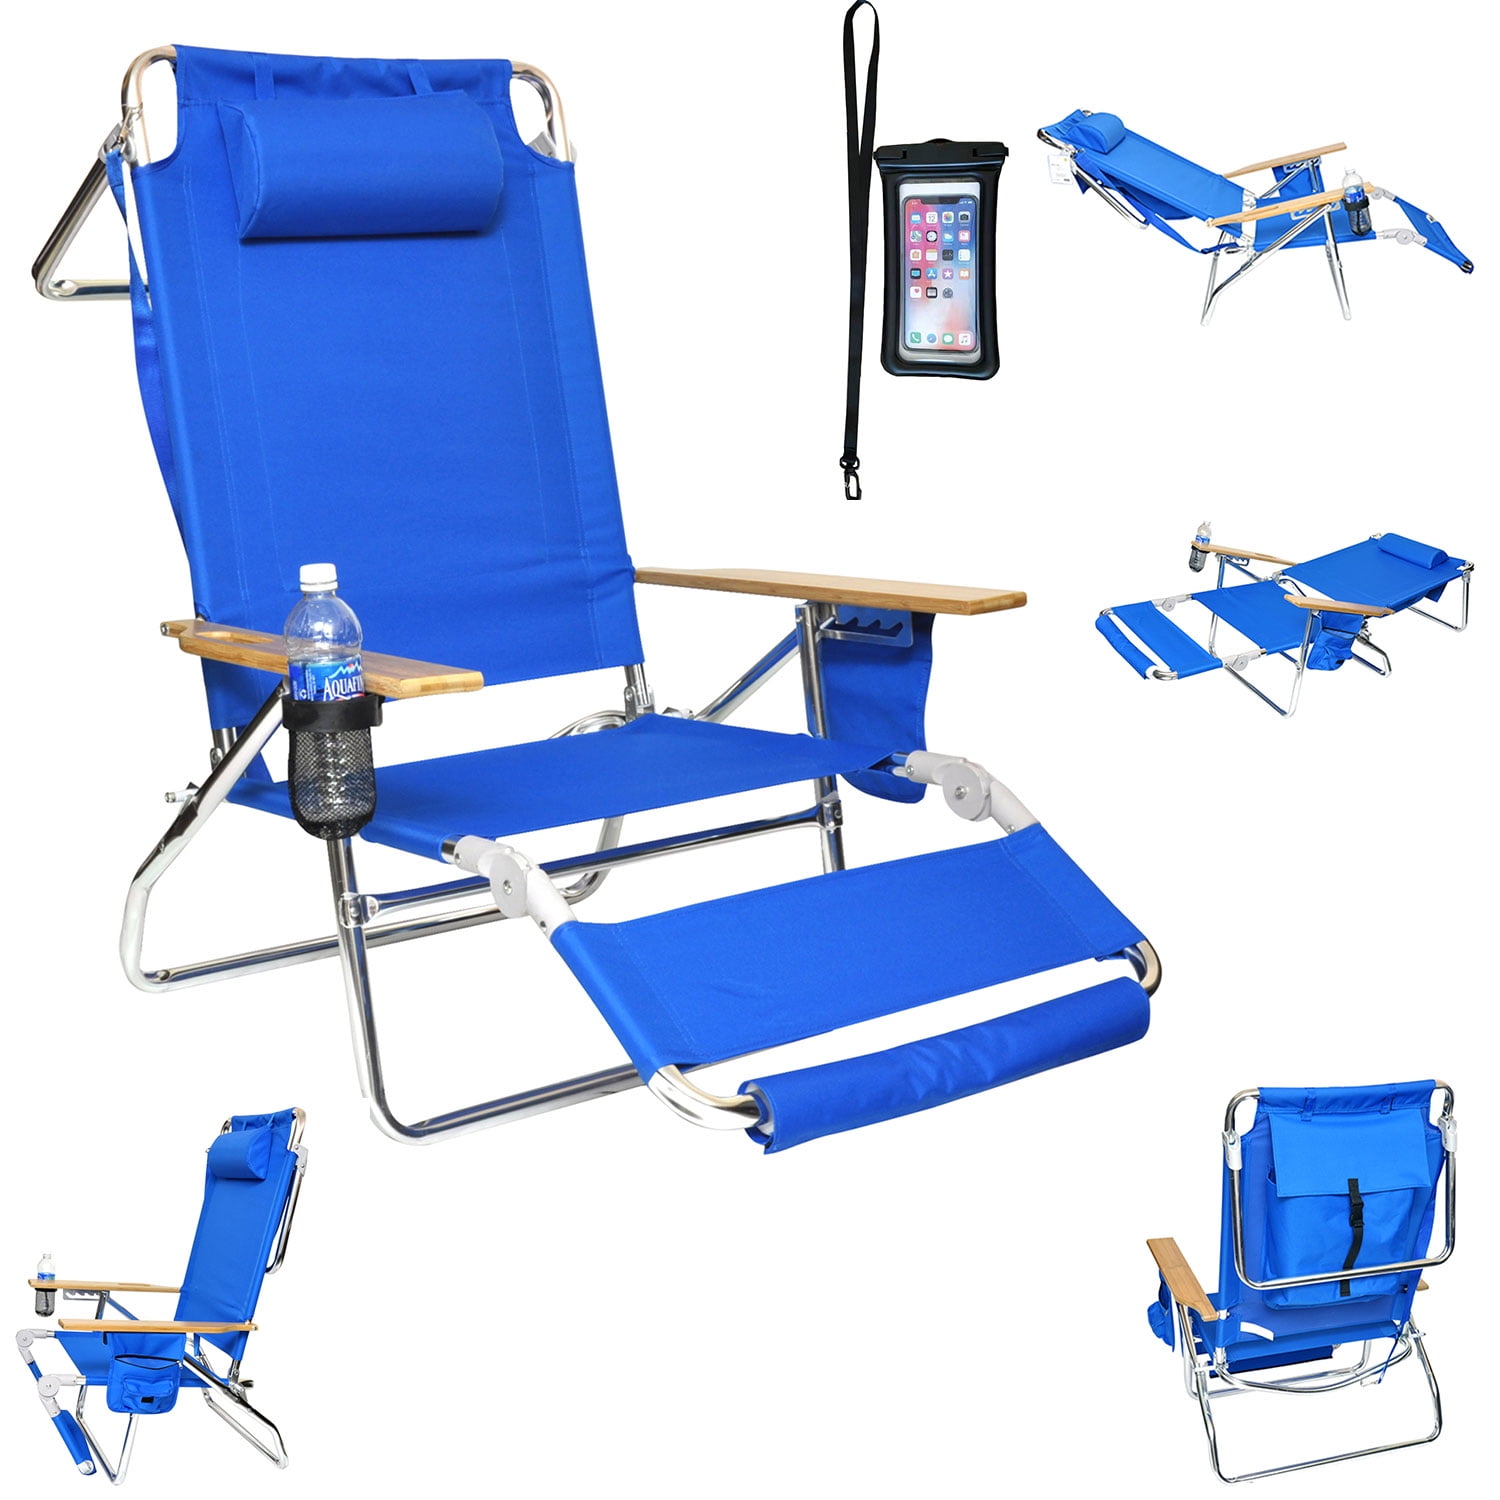 New Beach Chair Storage Pouch for Small Space